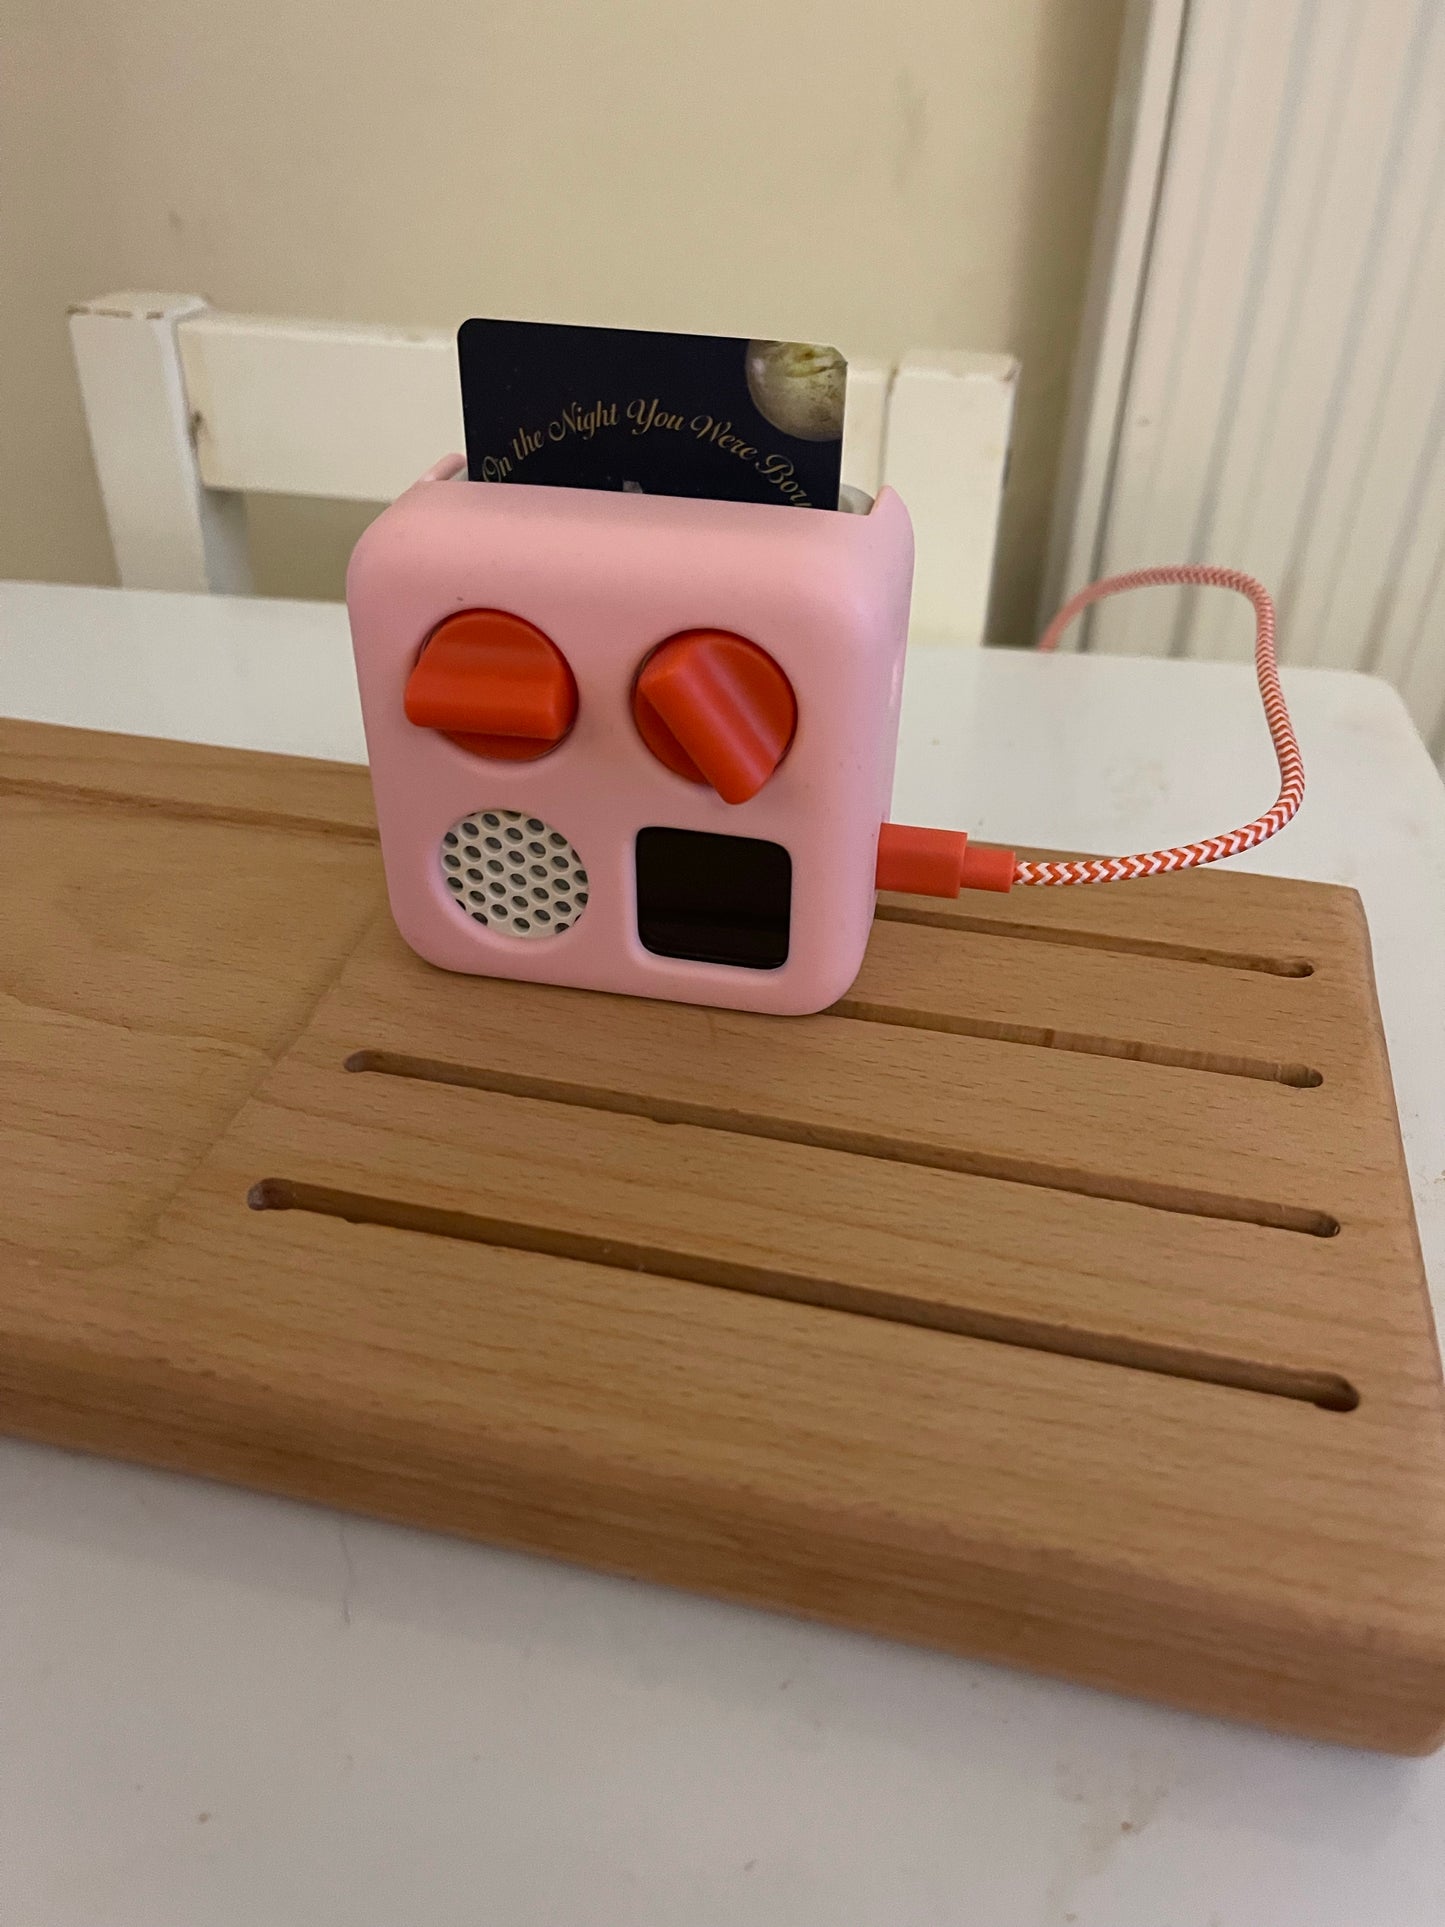 Yoto player docking station, stand and card holder - Live now! Uk made